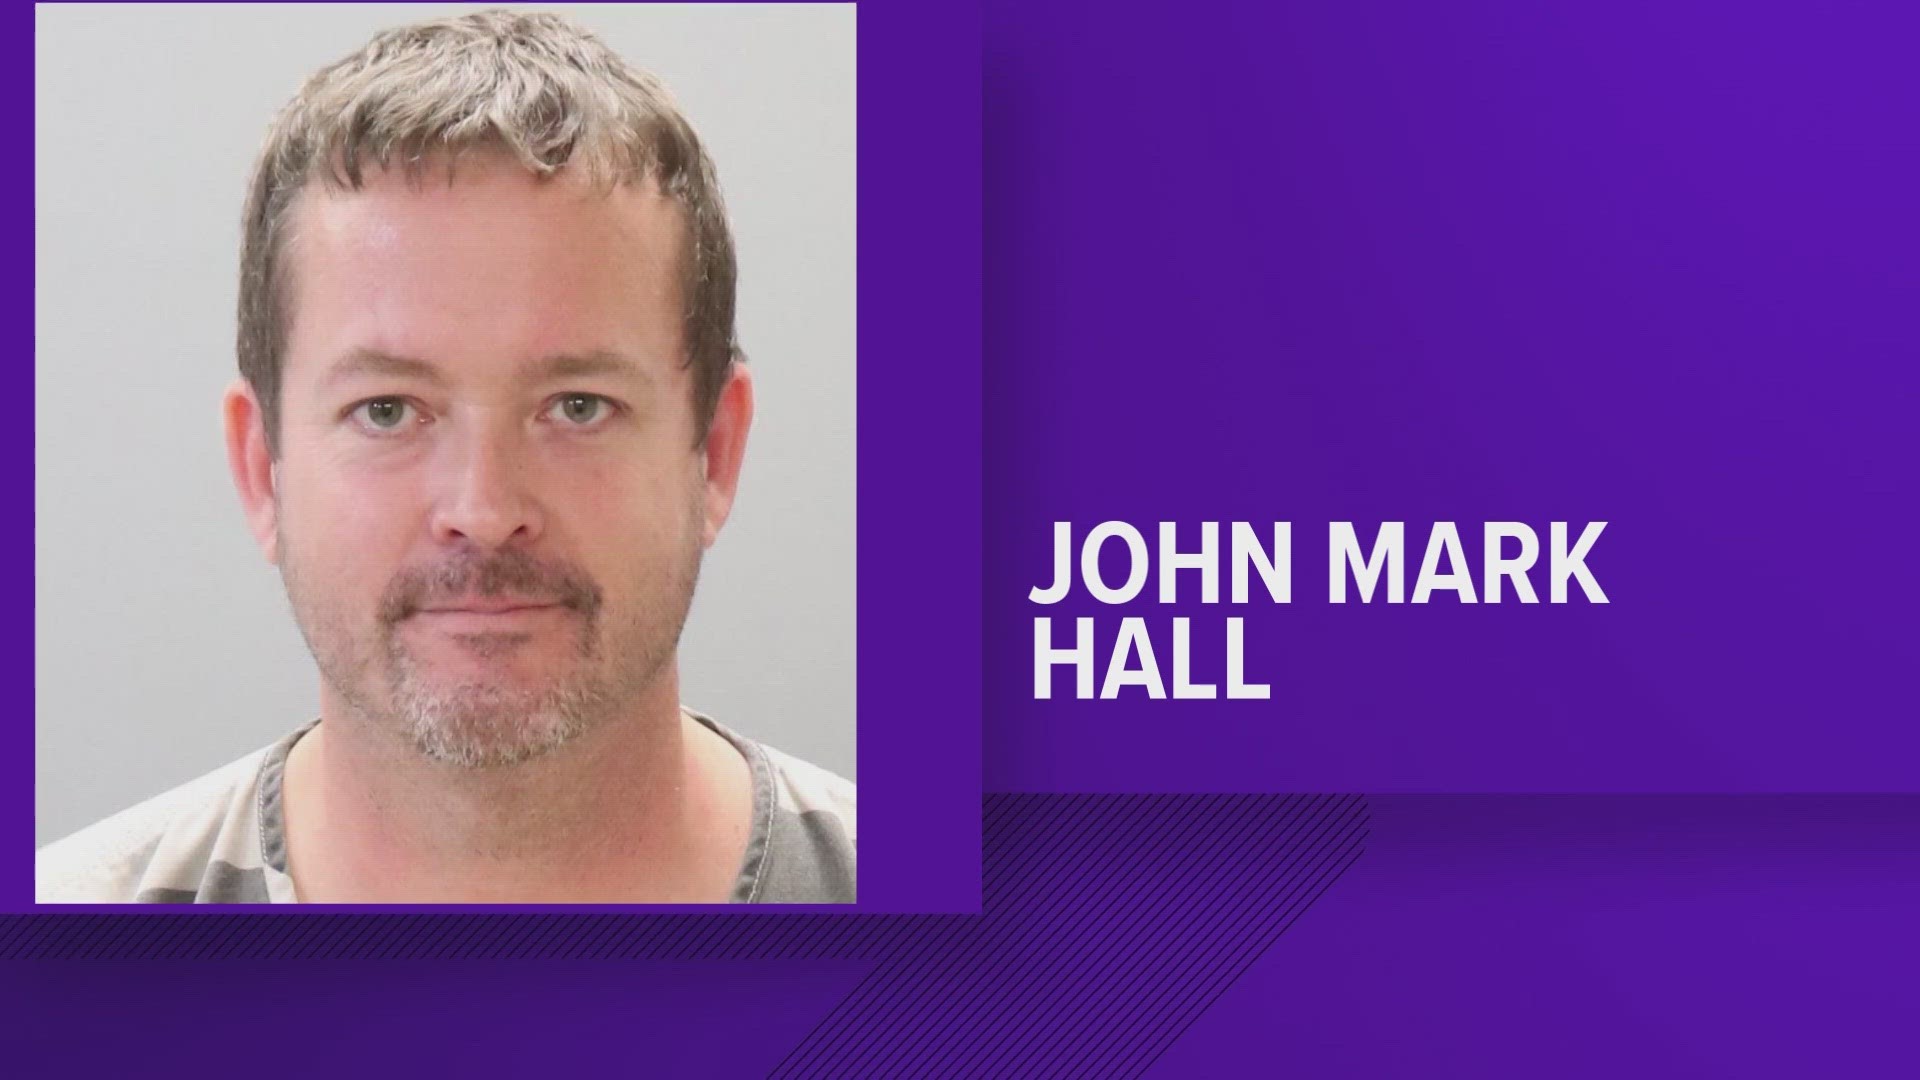 On June 13, 2022, John Hall went to their home and argued with his then-wife about the divorce and about hidden cameras that he had placed in their bedroom.